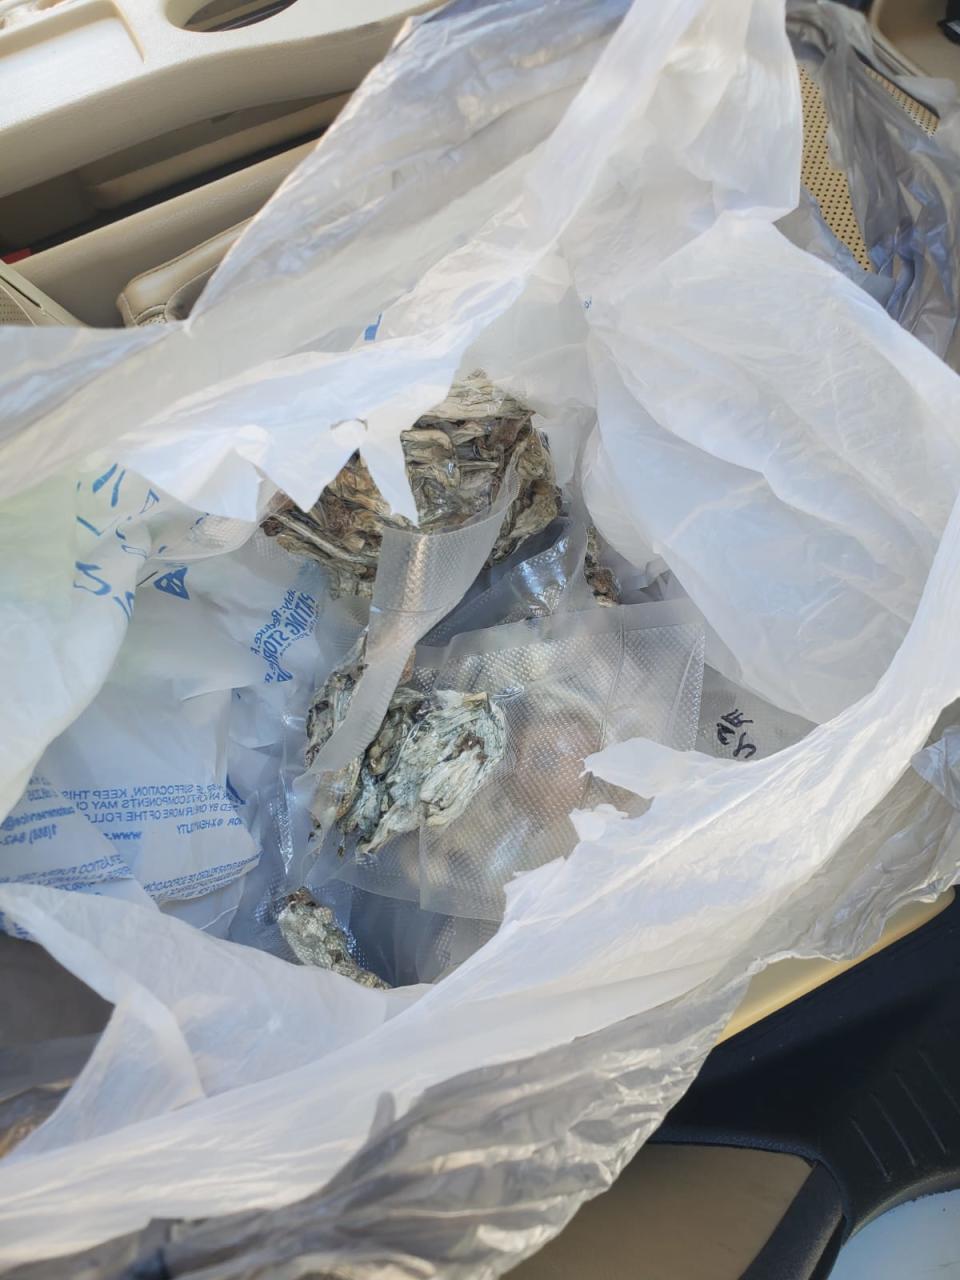 Mushrooms in bag (Courtesy of the Walton County Sheriff’s Office)